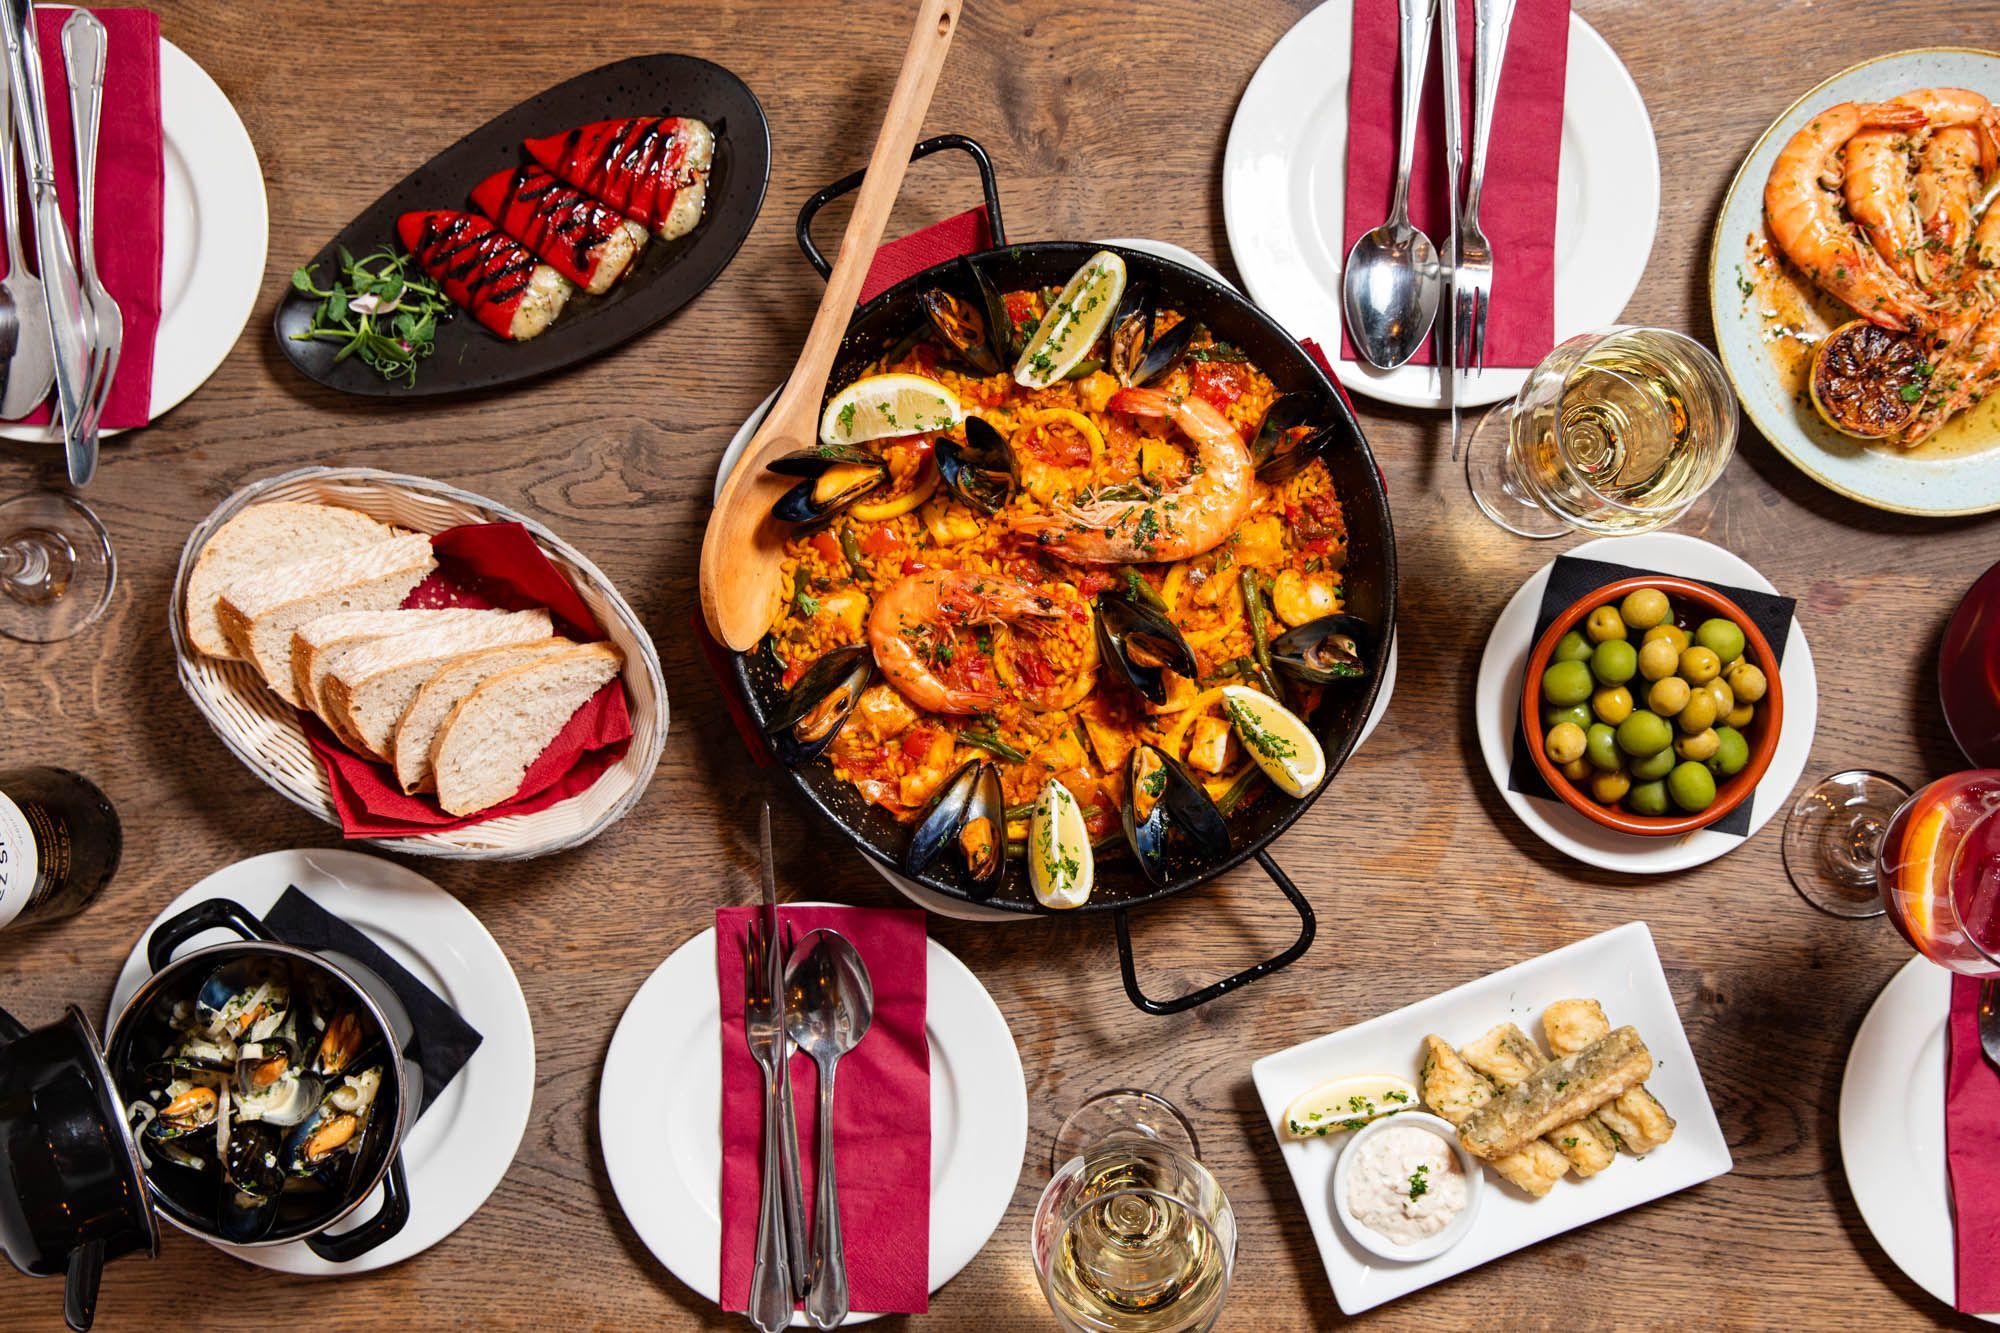 over head shot of the table laid out with delicious Spanish tapas including paella, fish dishes, bread, olives, fried fish, glasses of white wine